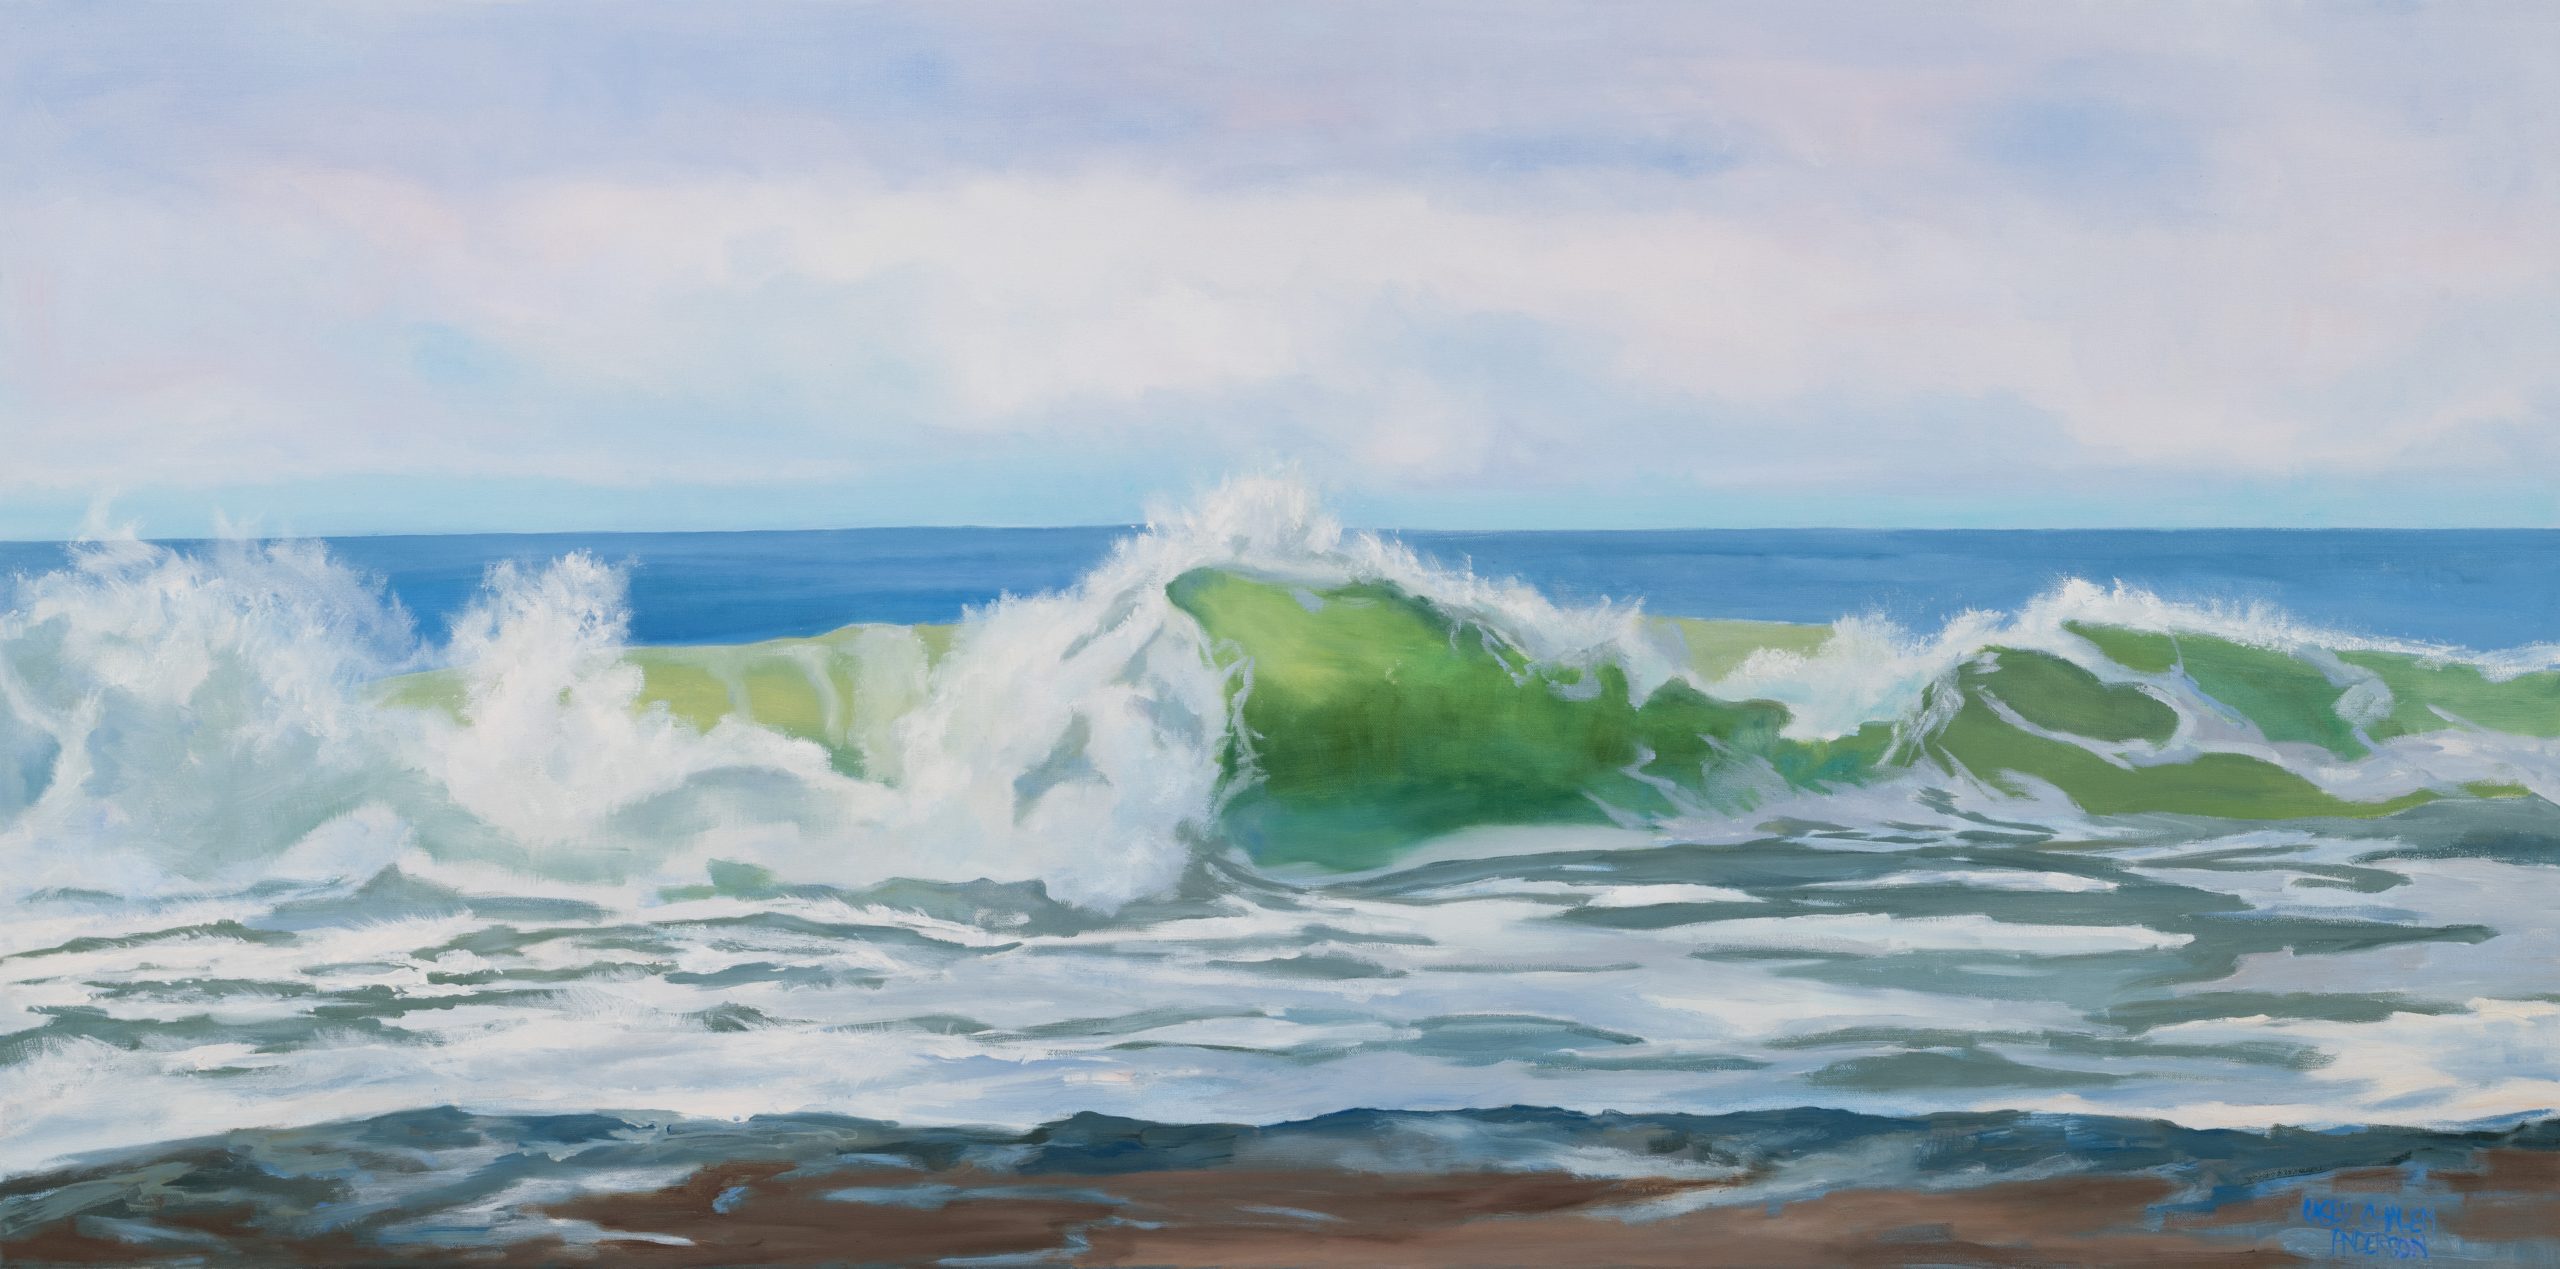 "Curve Wave" 24 x 48 inches oil/canvas by Casey Chalem Anderson